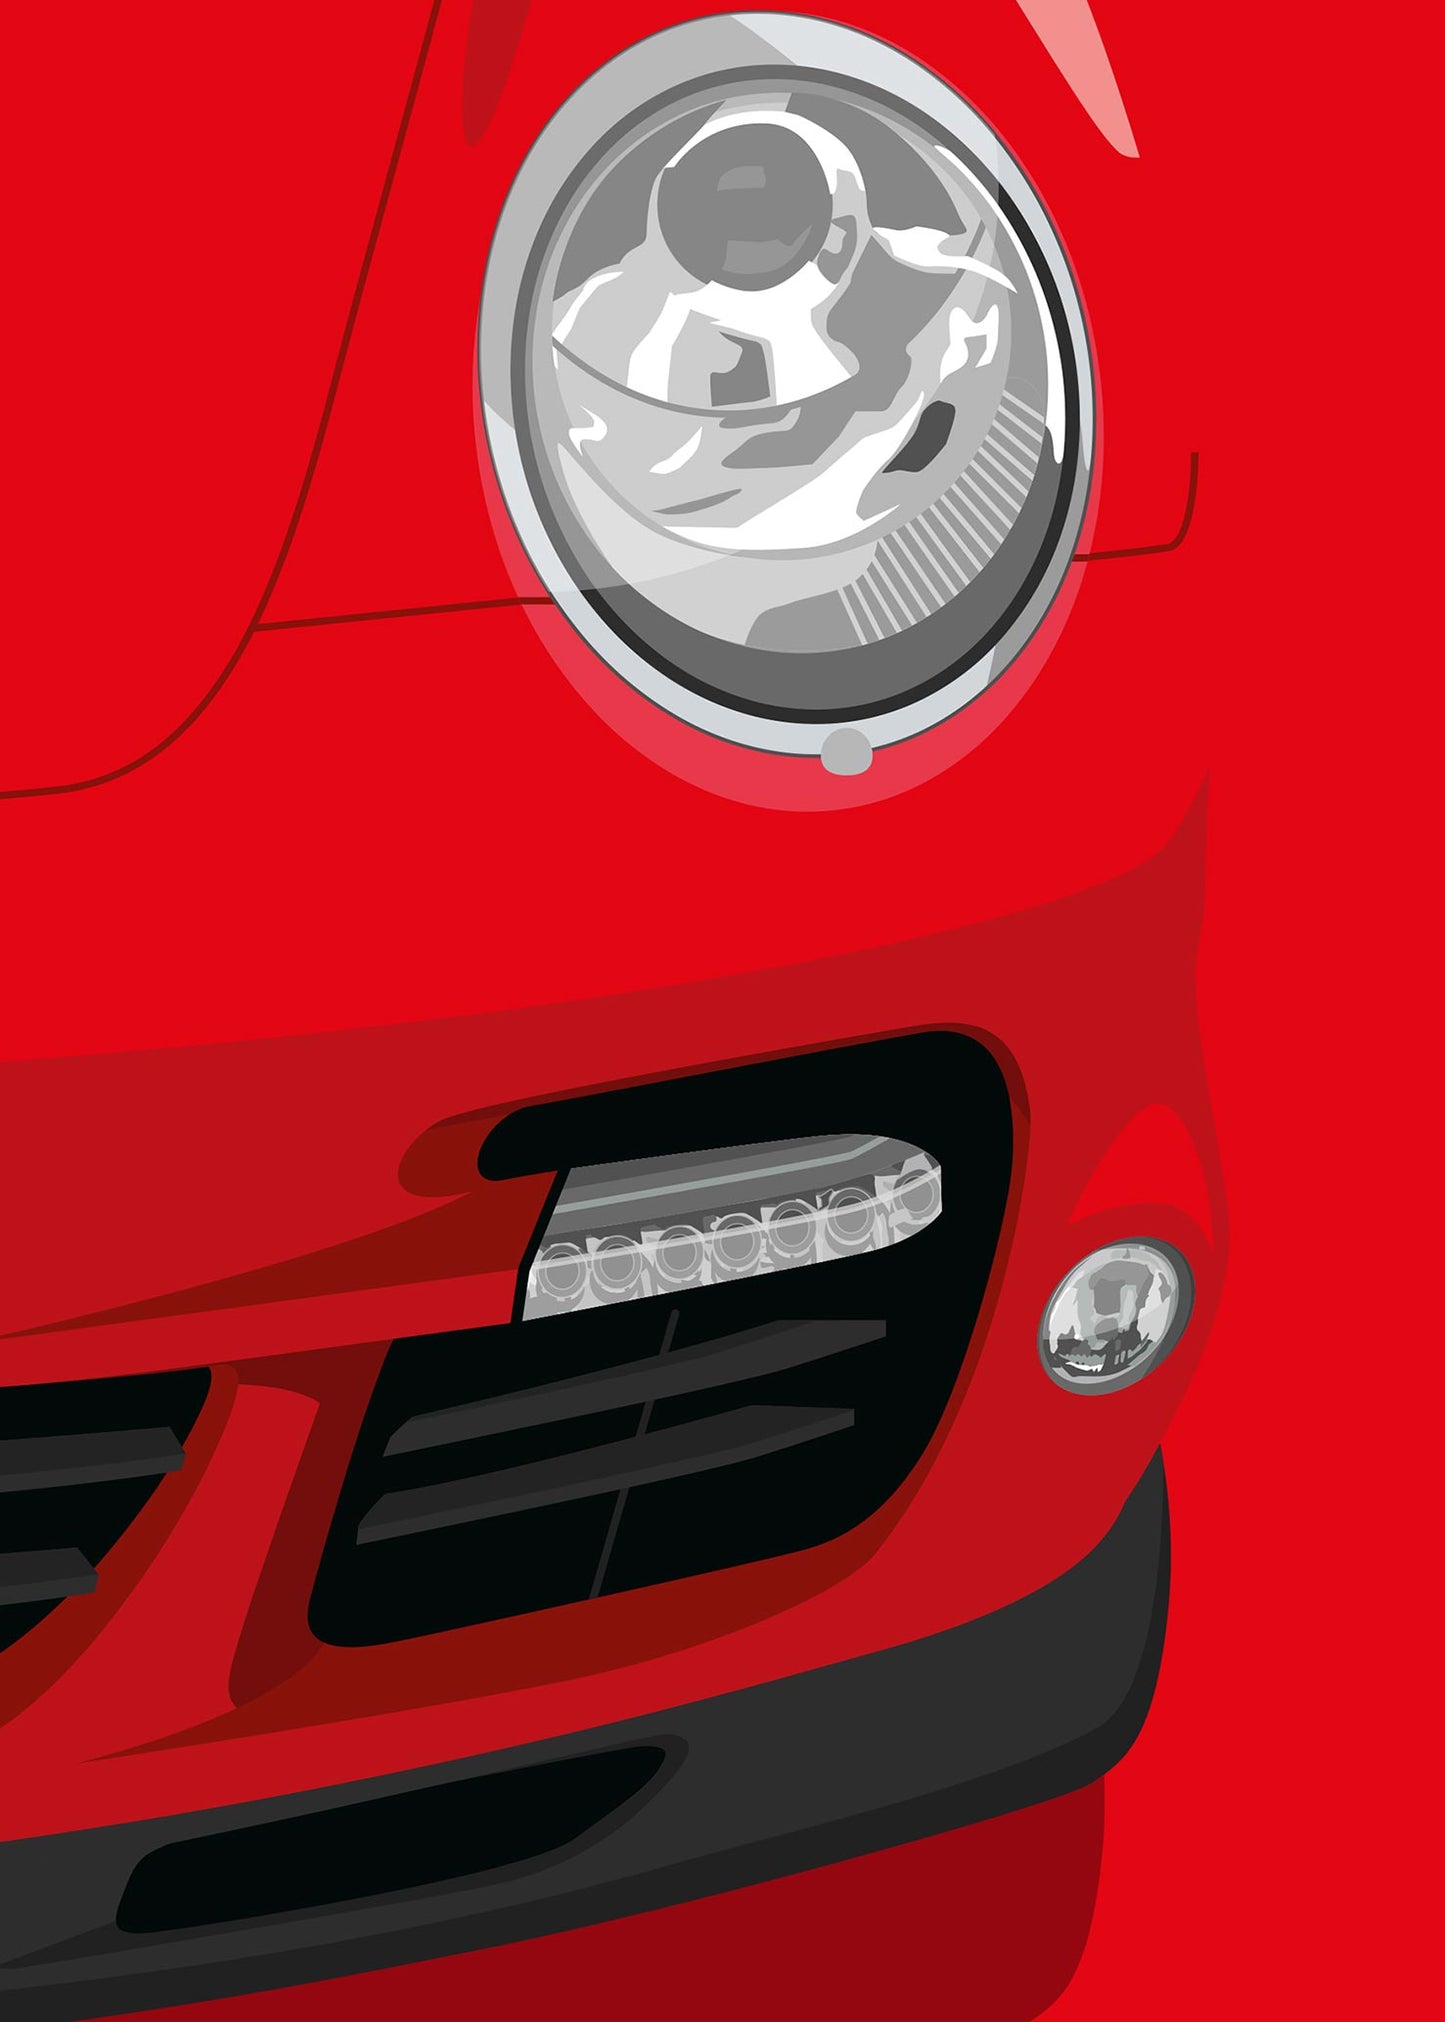 2006 Porsche 911 (997.1) Turbo Guards Red - poster print